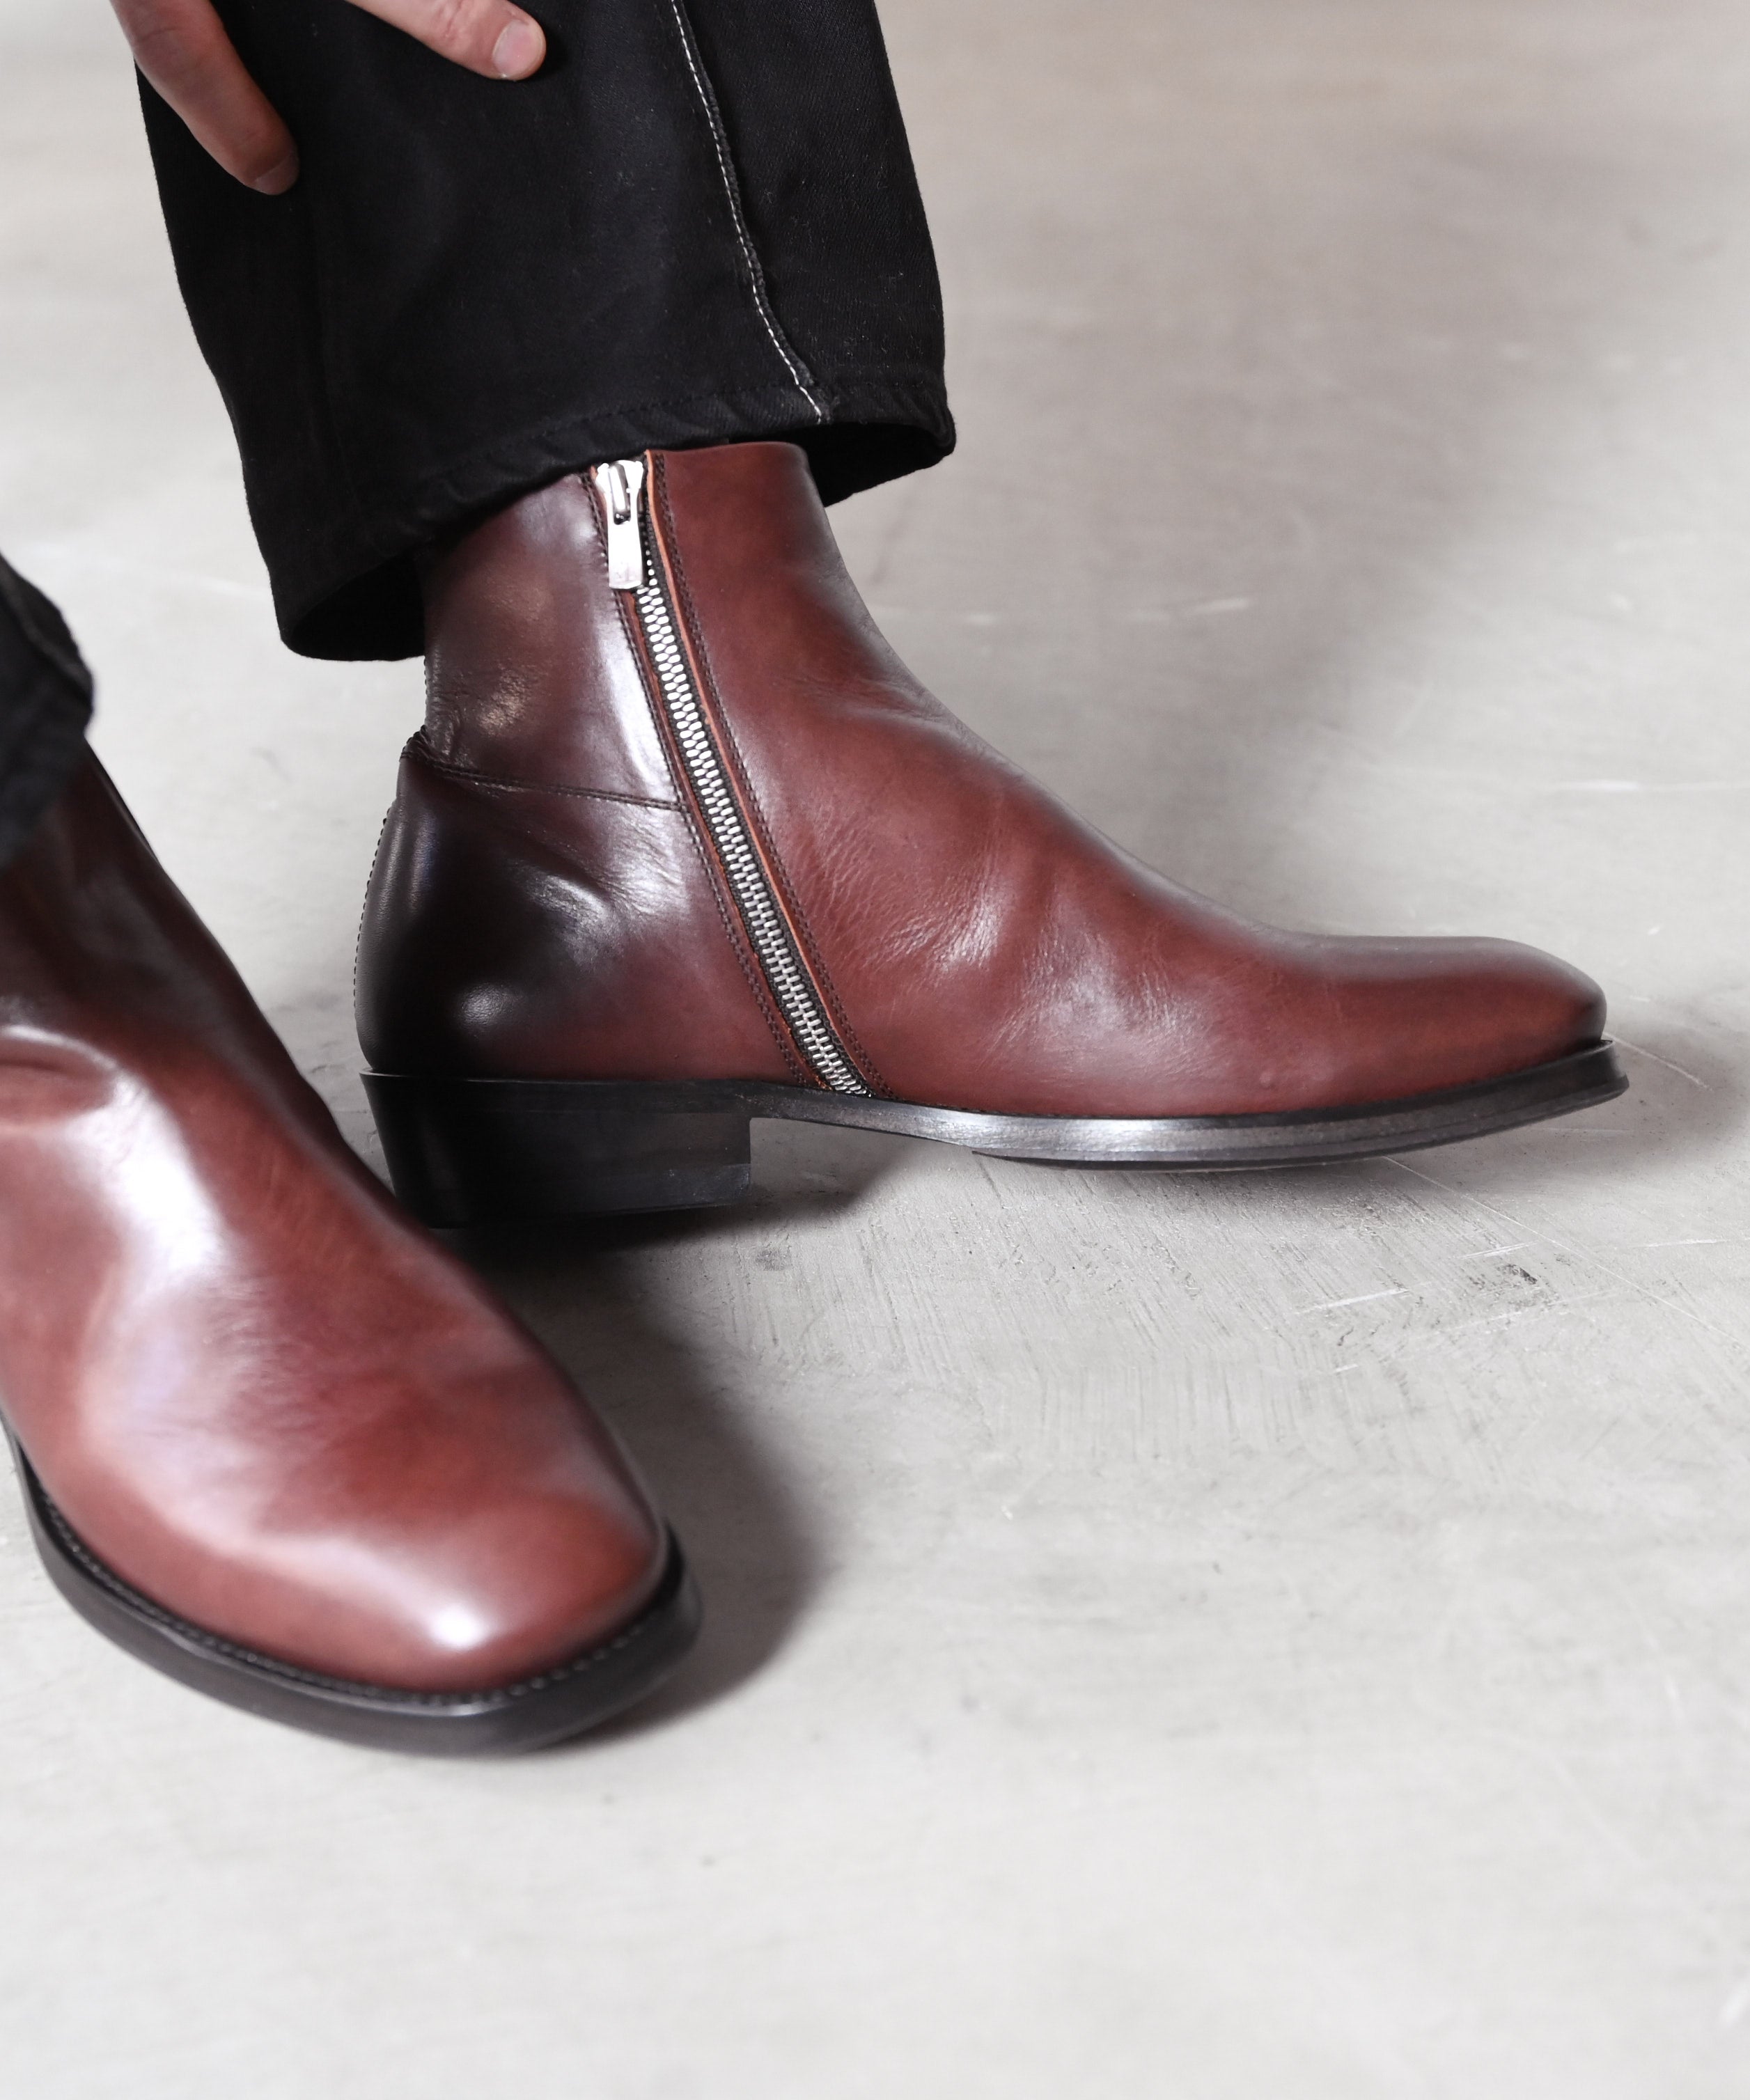 New side zip boots / ER1201 – EARLE(アール)｜公式オンラインストア